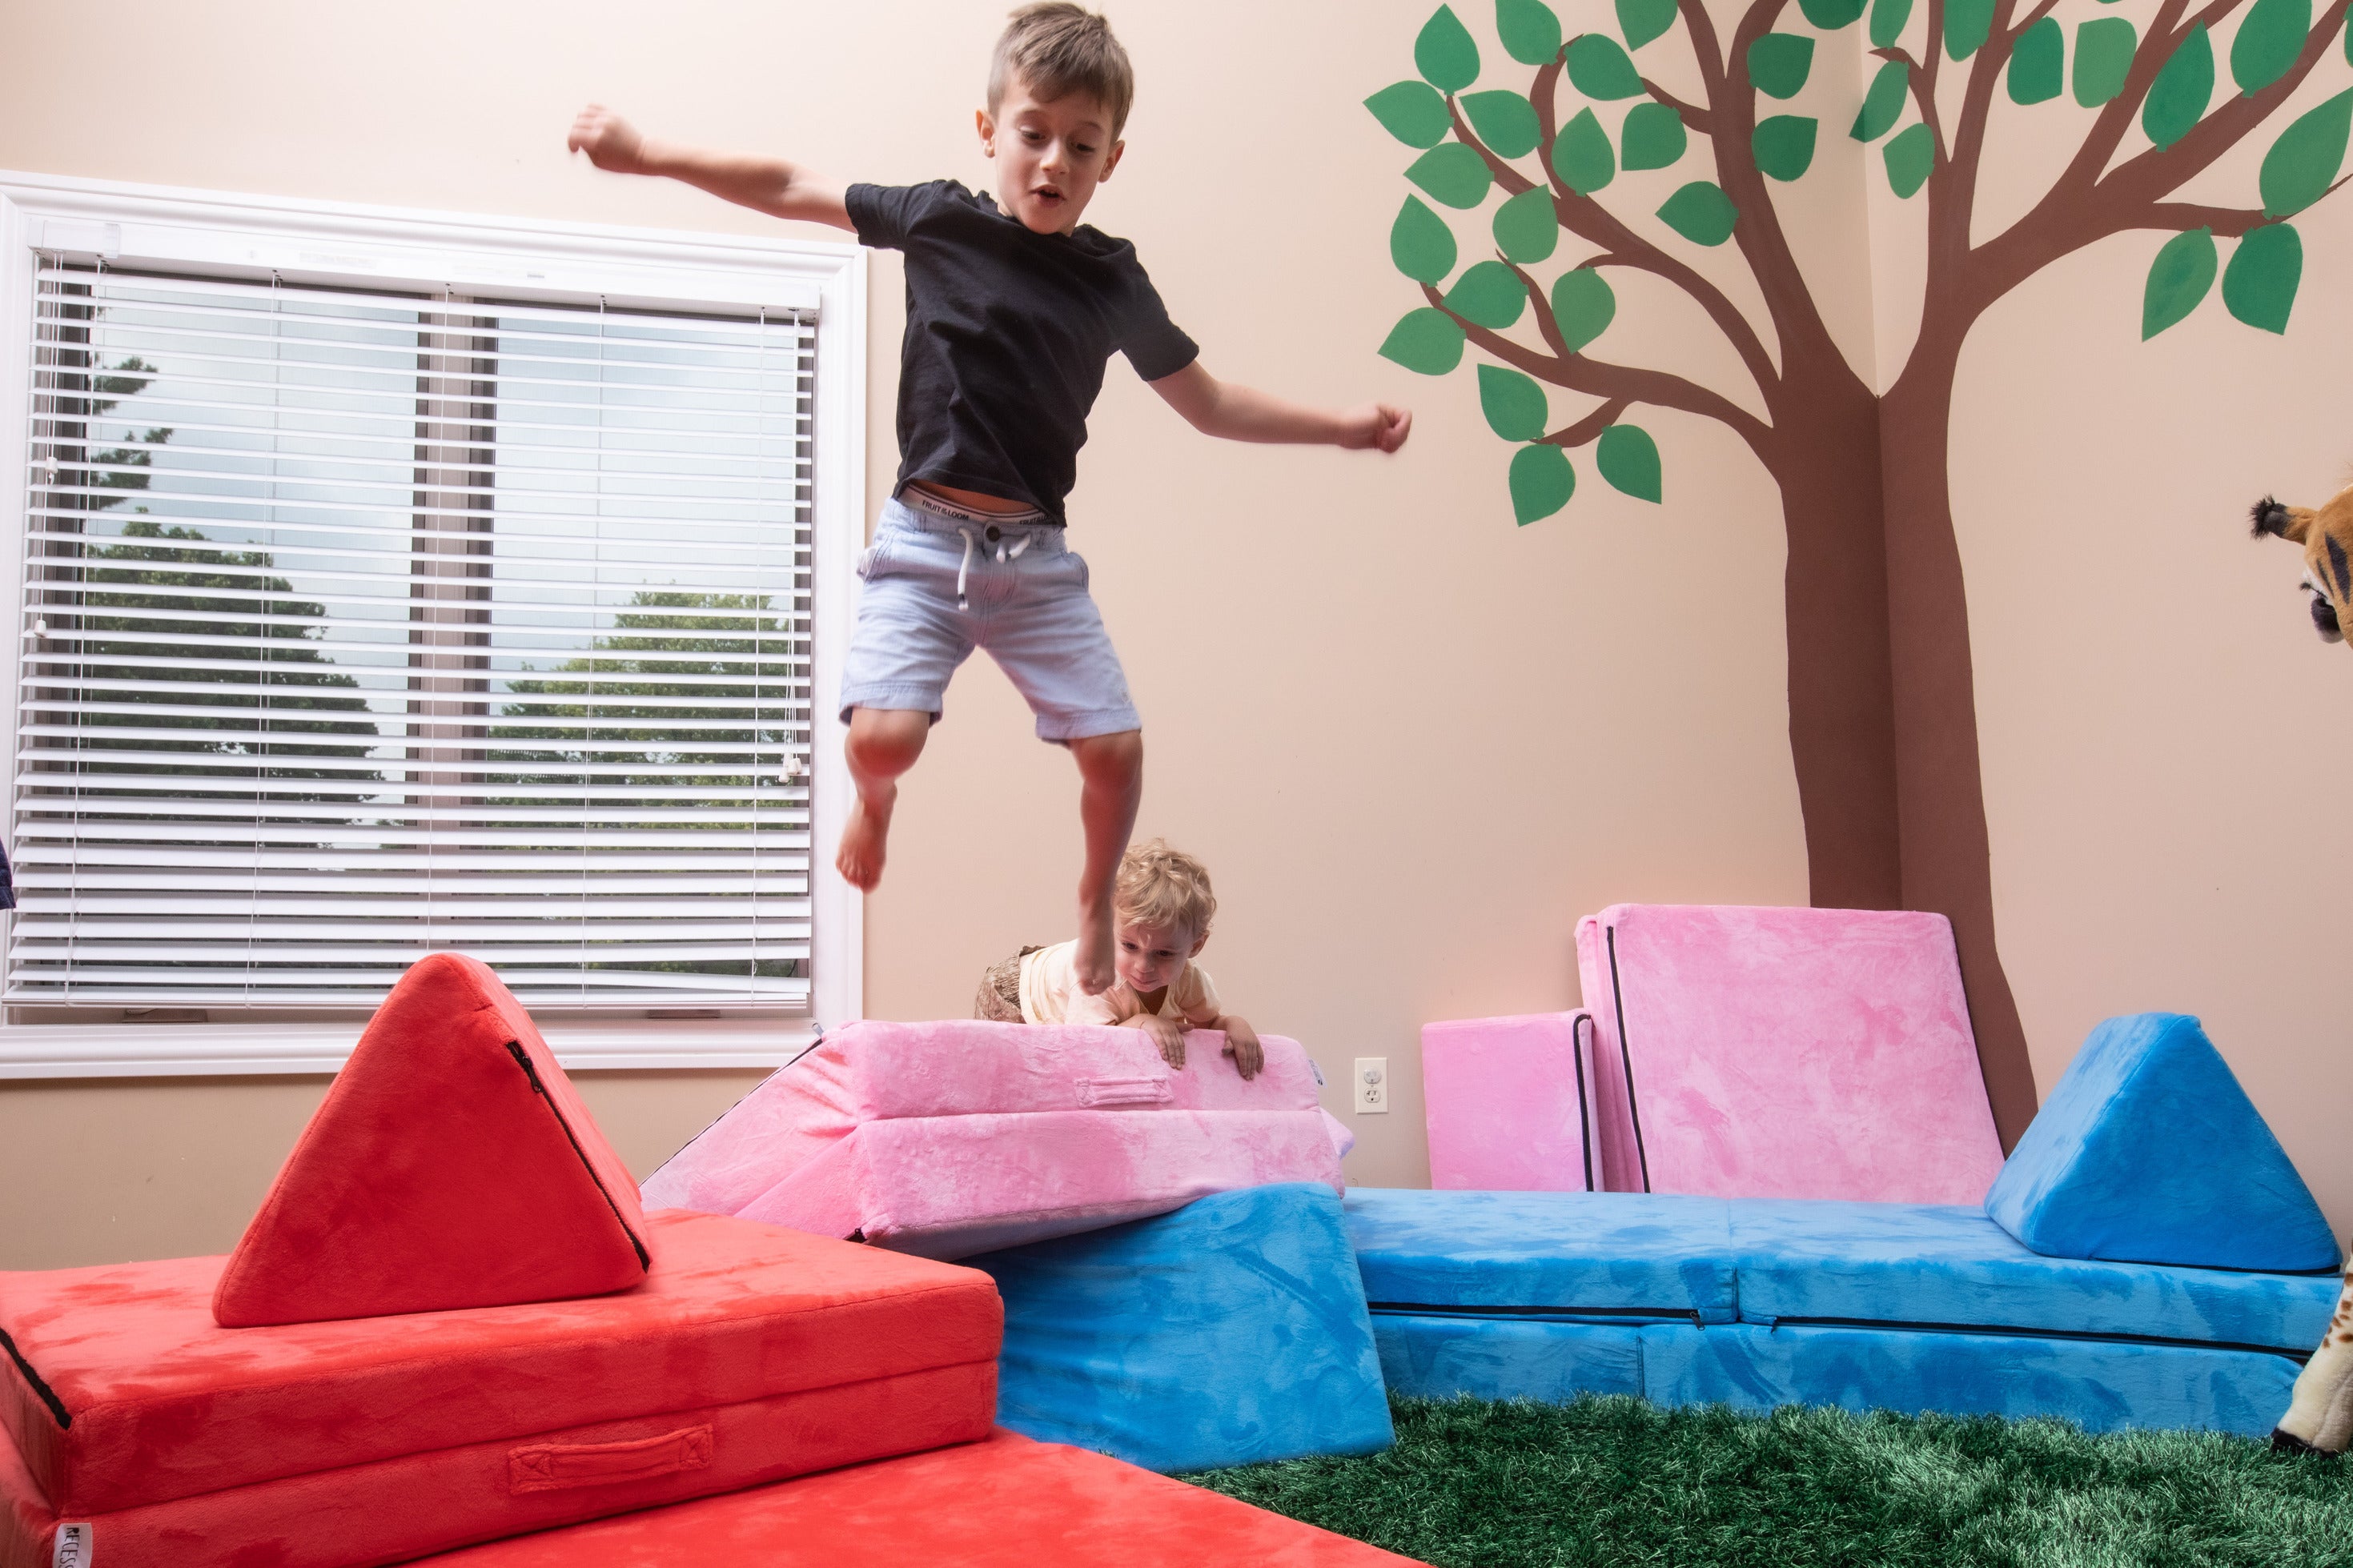 Kid Couch - Modular Foam Play Couch